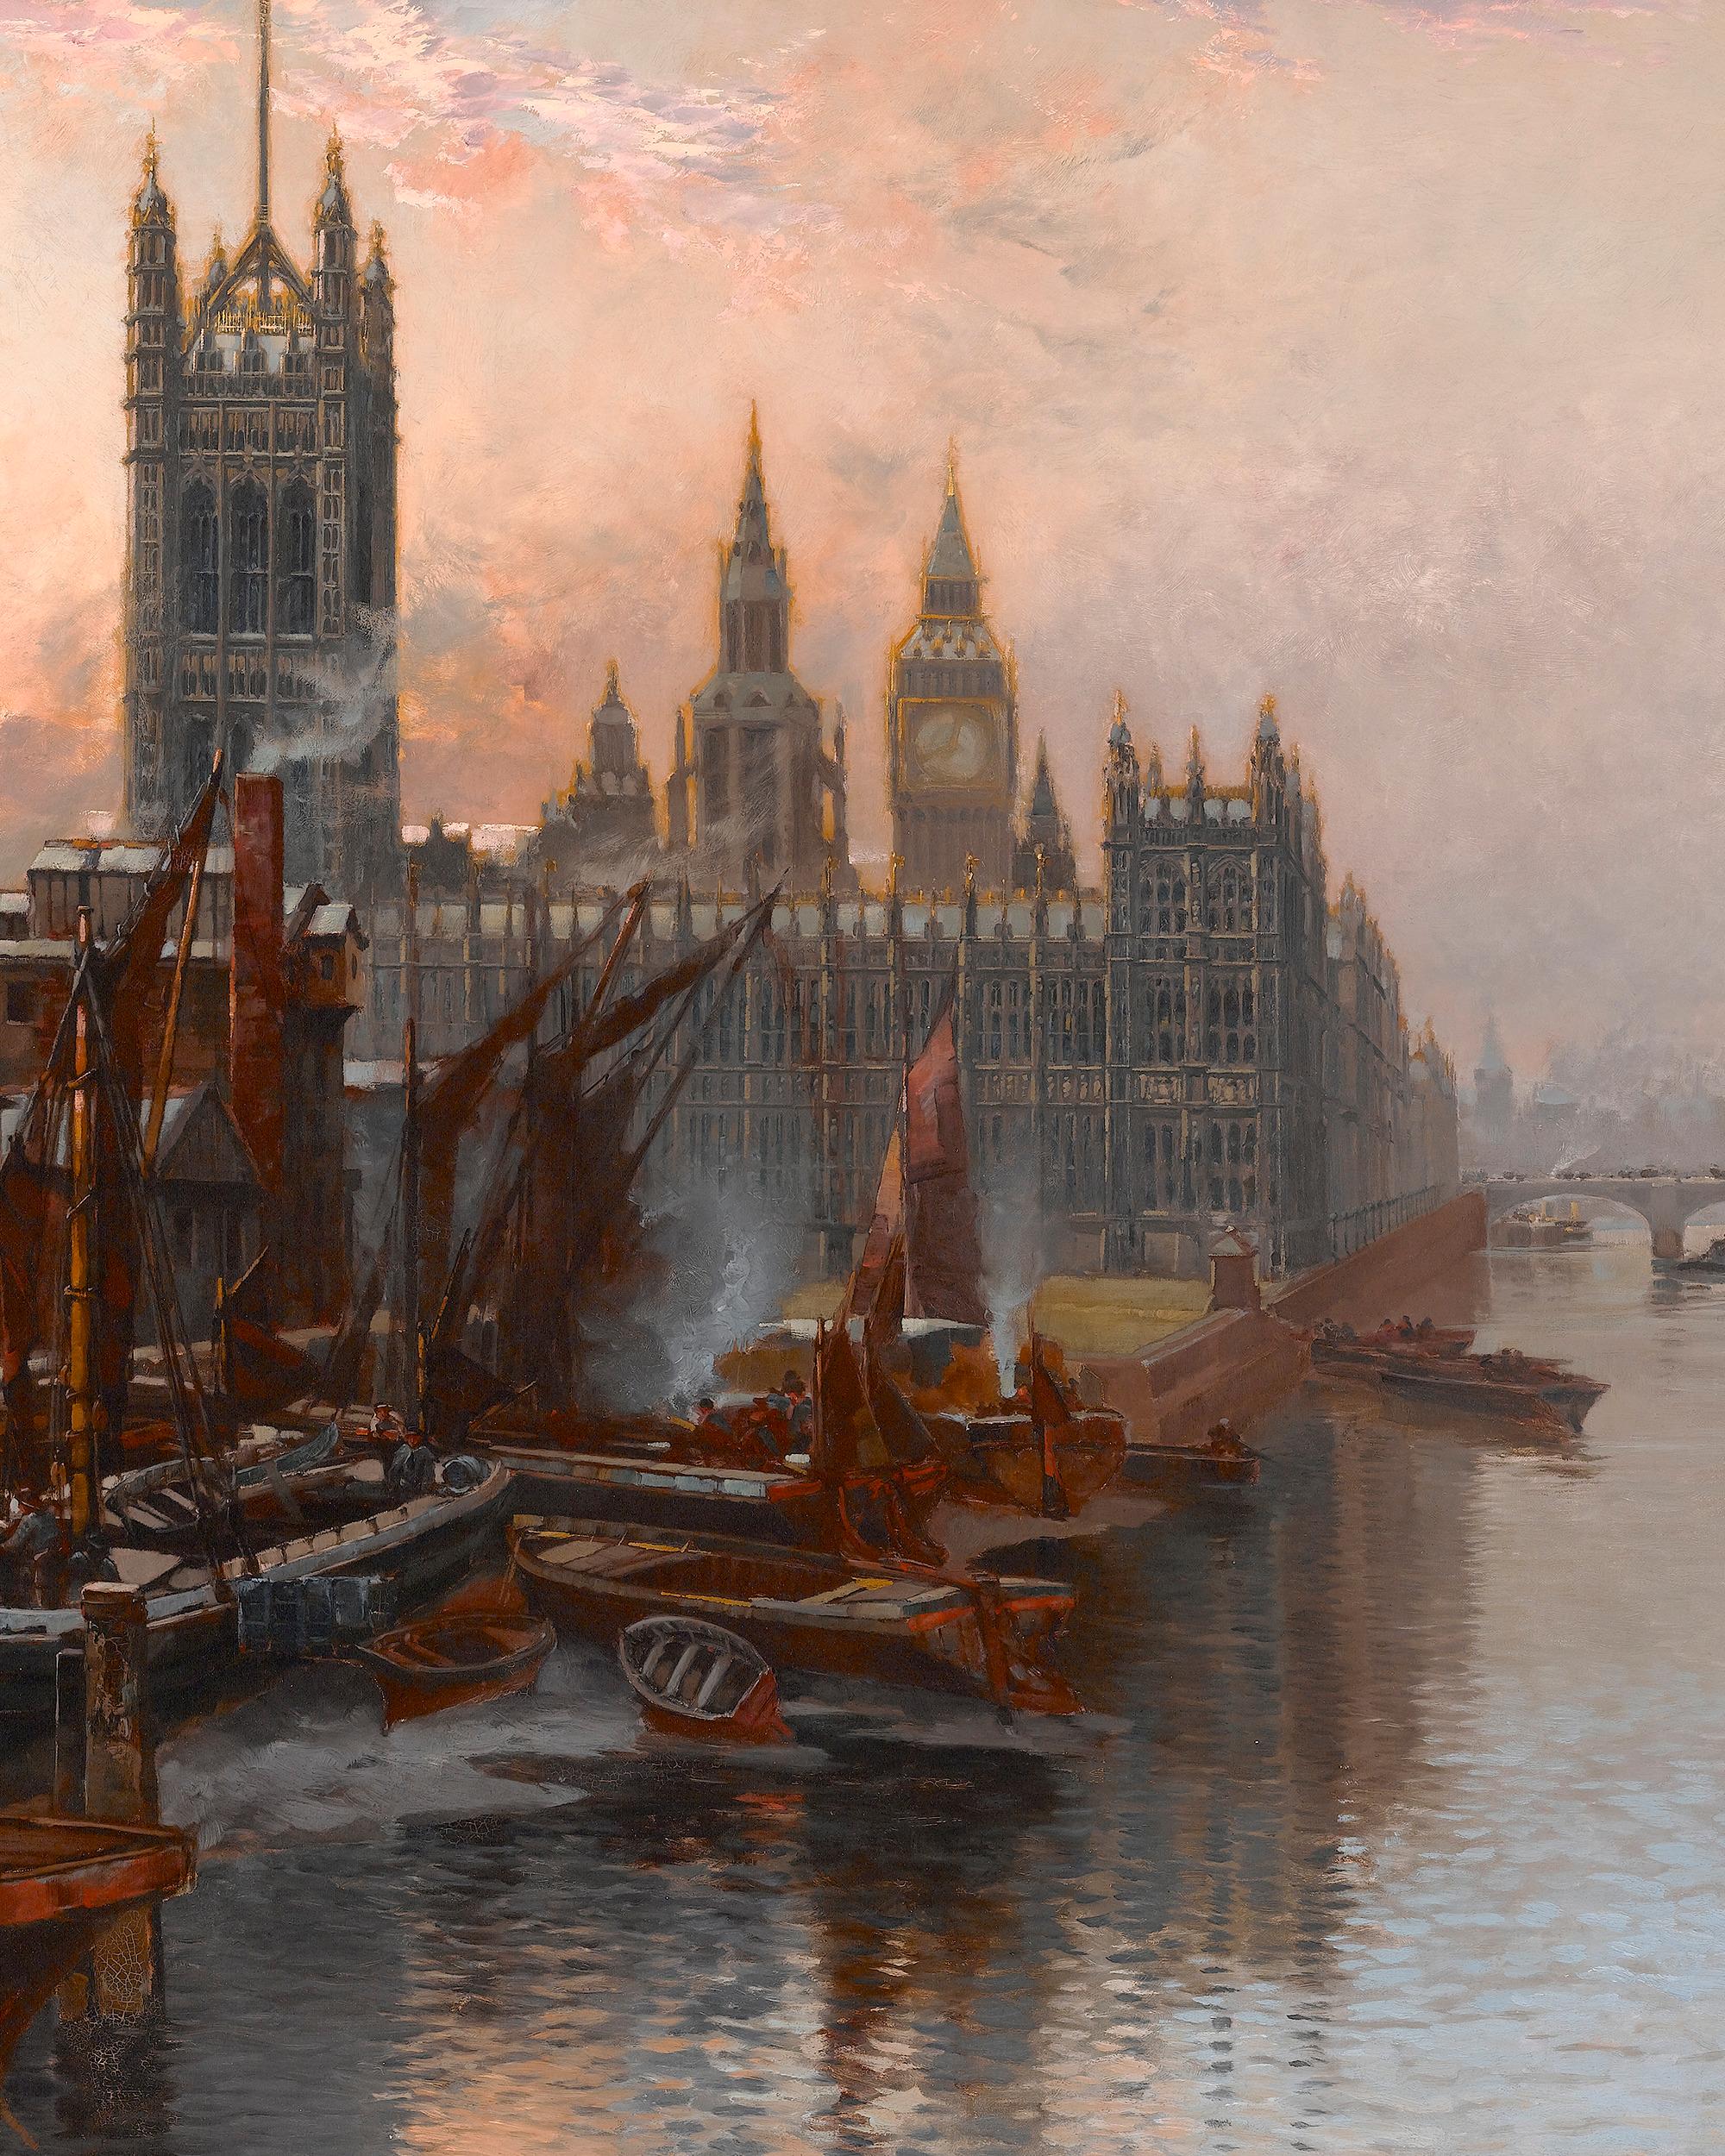 A View of the Houses of Parliament from the Thames, London - Black Landscape Painting by Thomas Greenhalgh